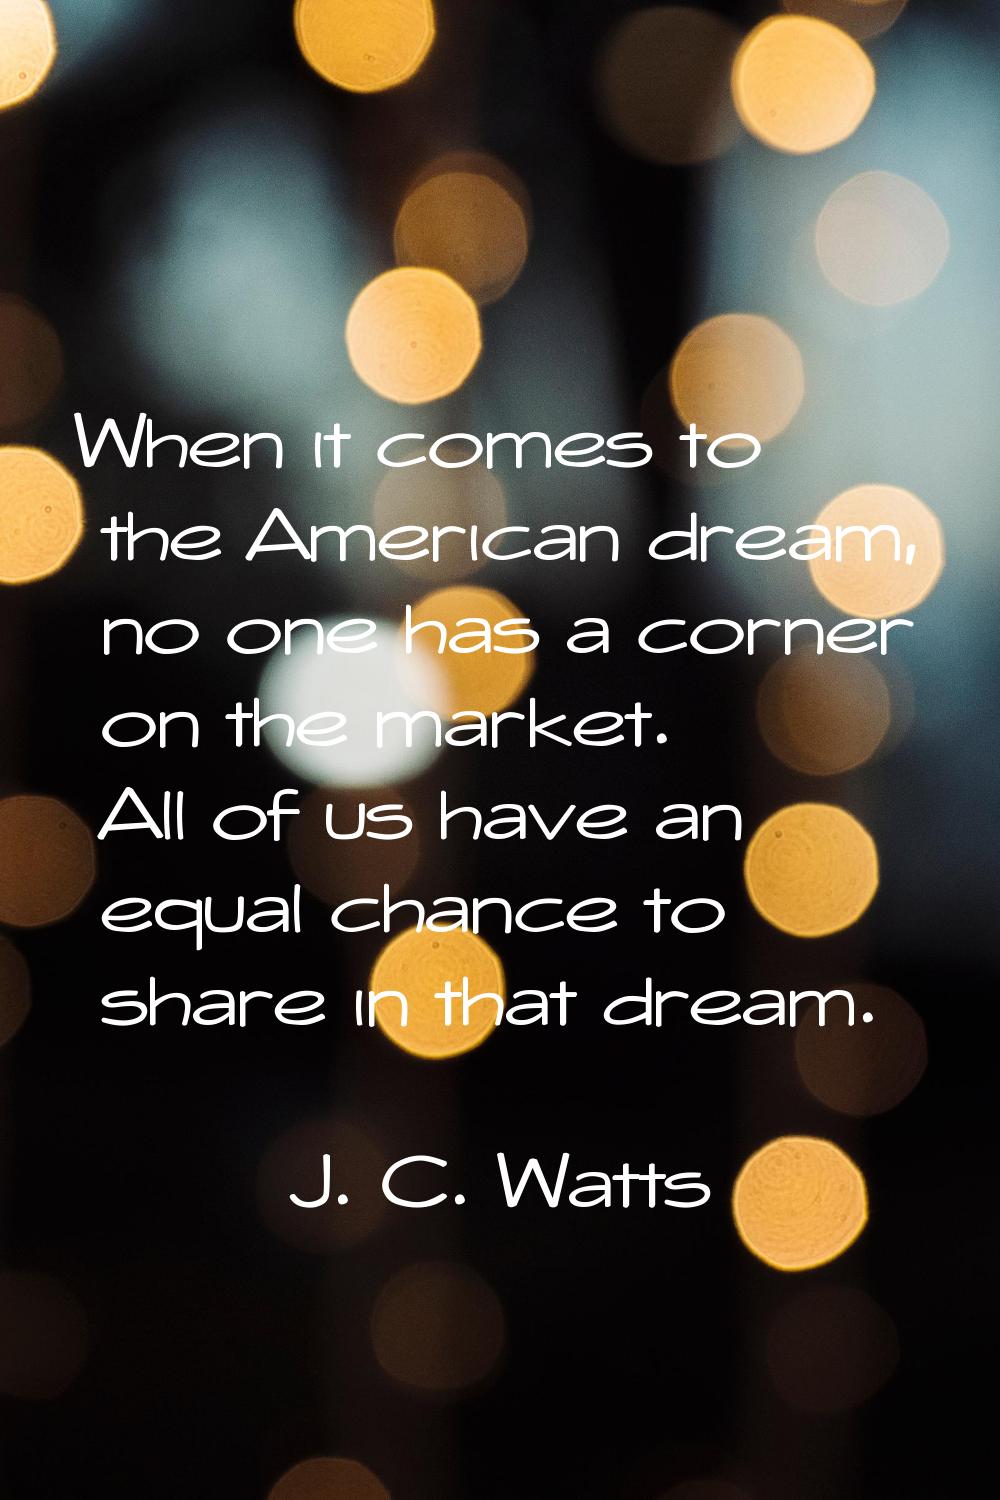 When it comes to the American dream, no one has a corner on the market. All of us have an equal cha